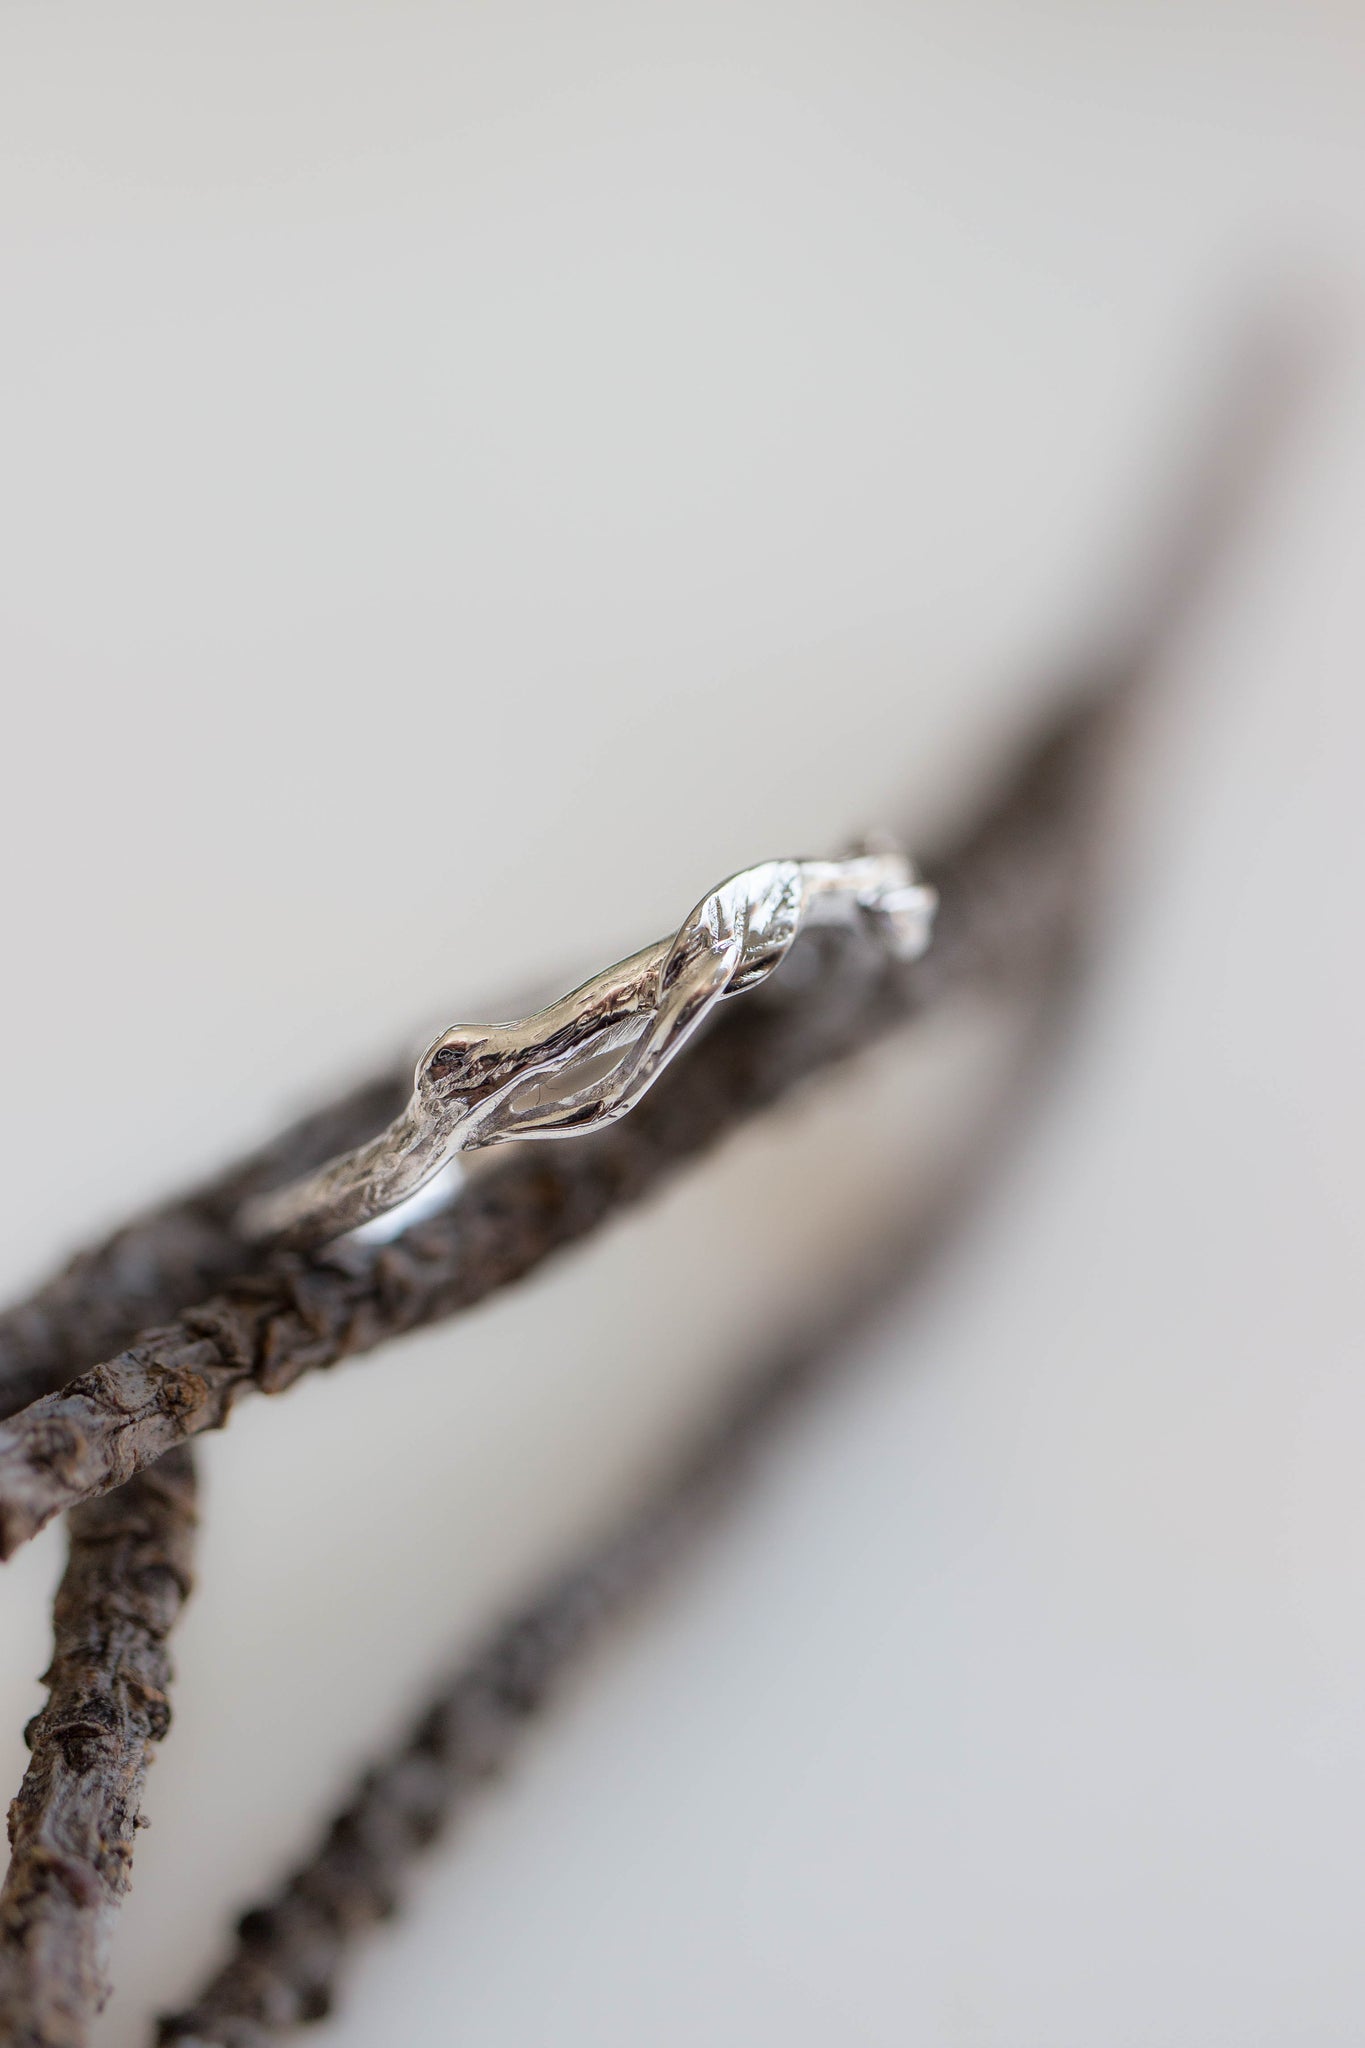 Branch wedding ring, matching band for Clematis - Eden Garden Jewelry™